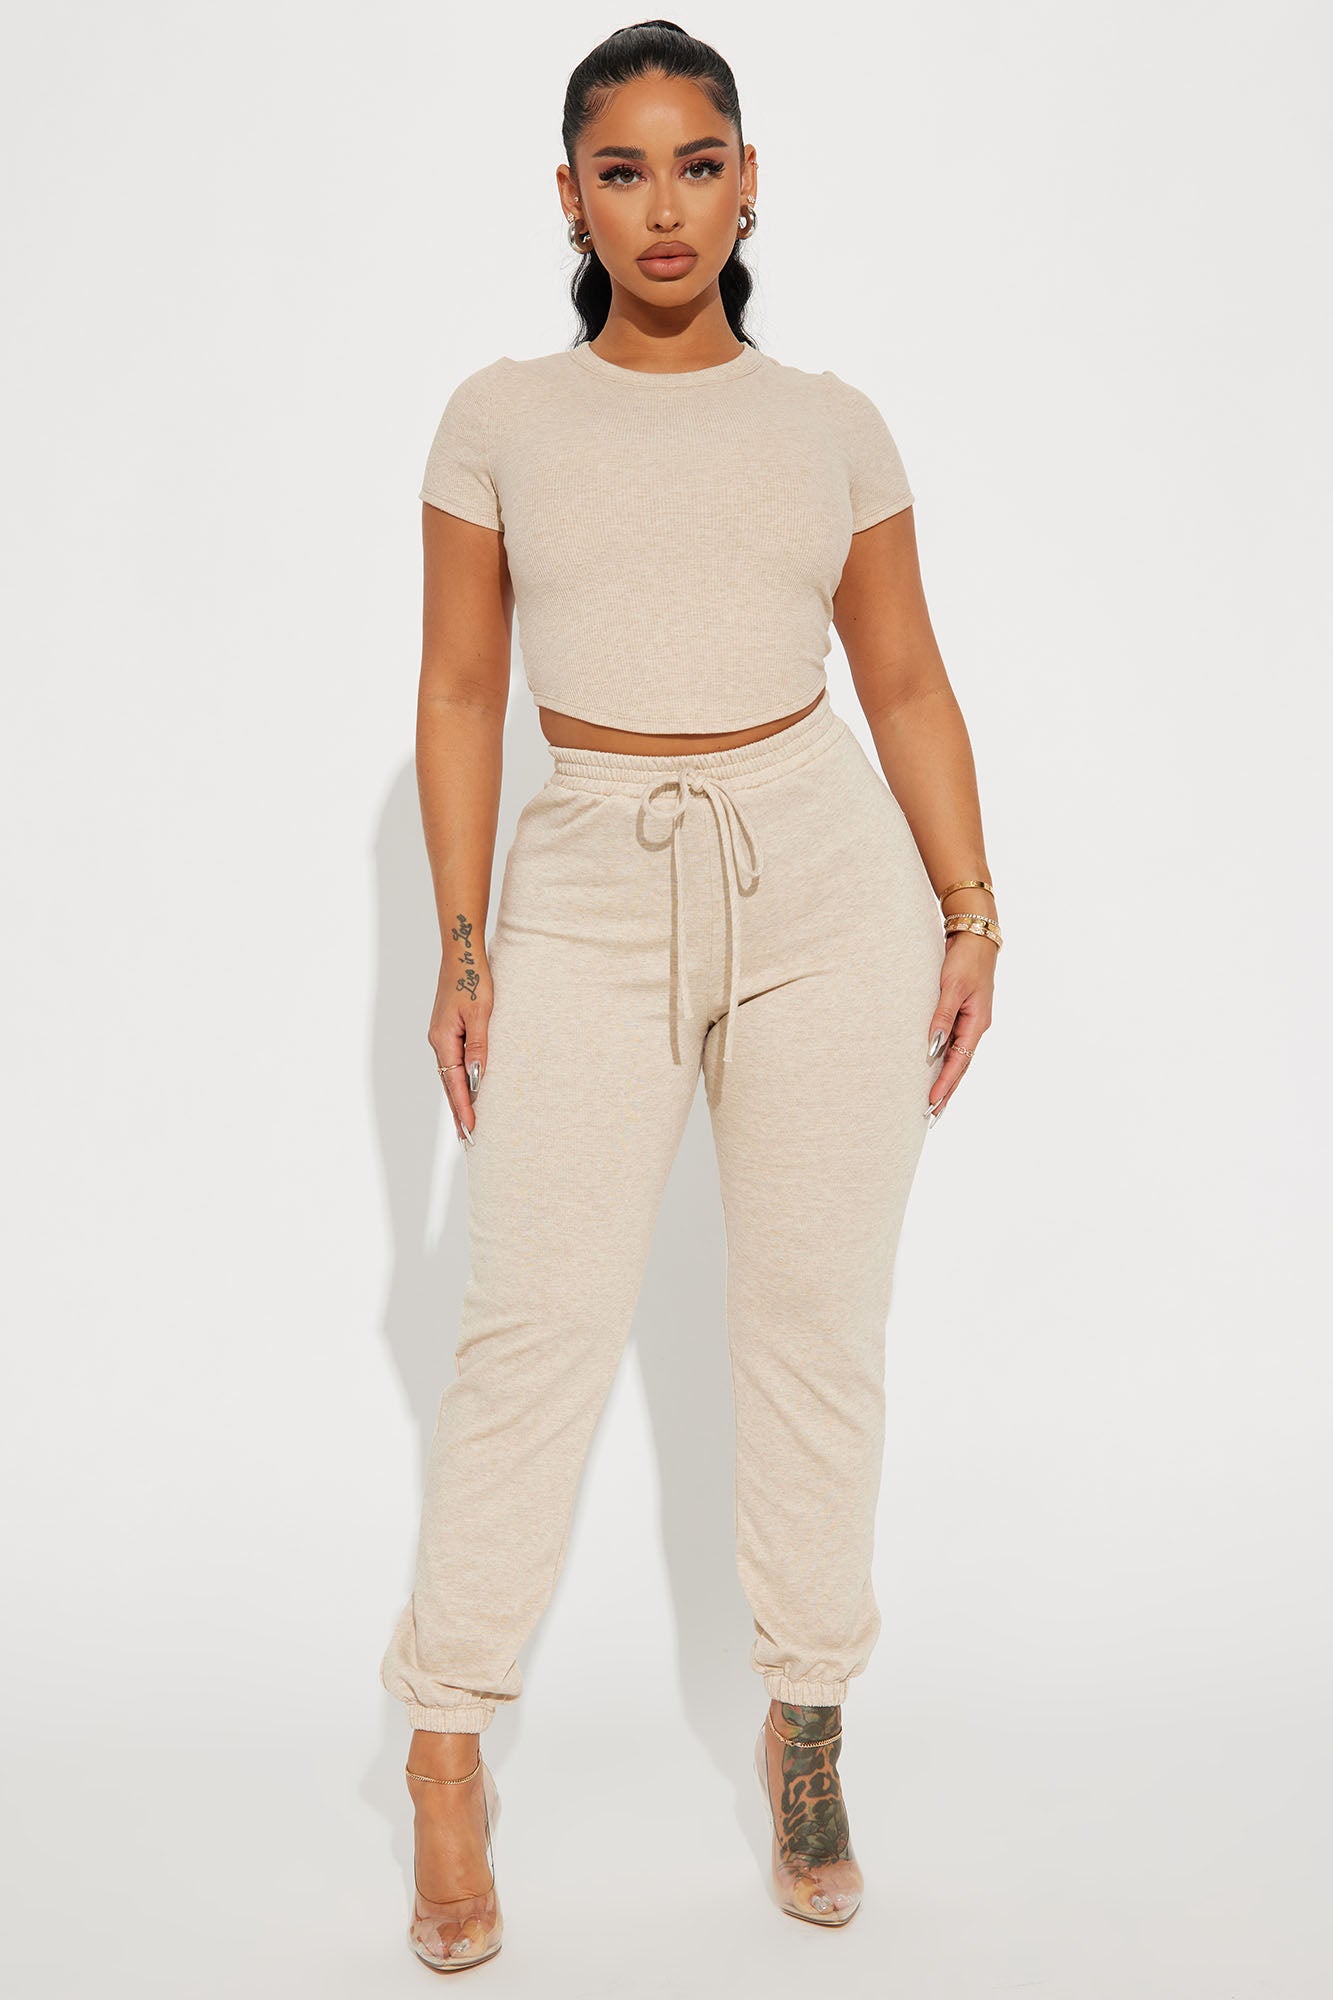 All In Jogger Set - Oatmeal